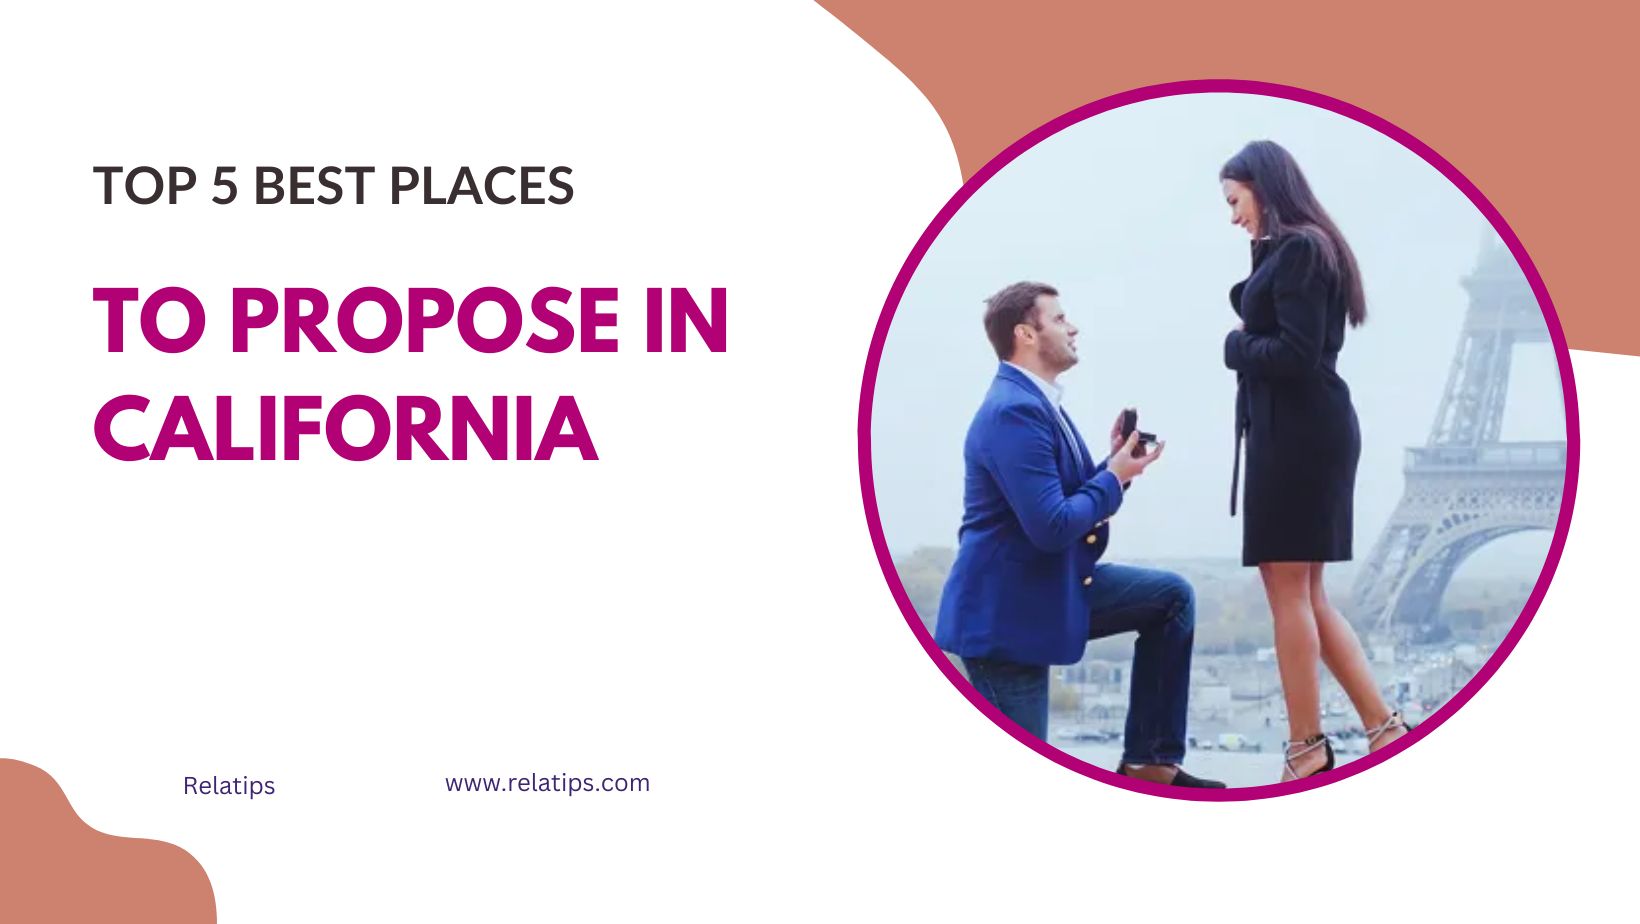 Top 5 Best Places to Propose in California